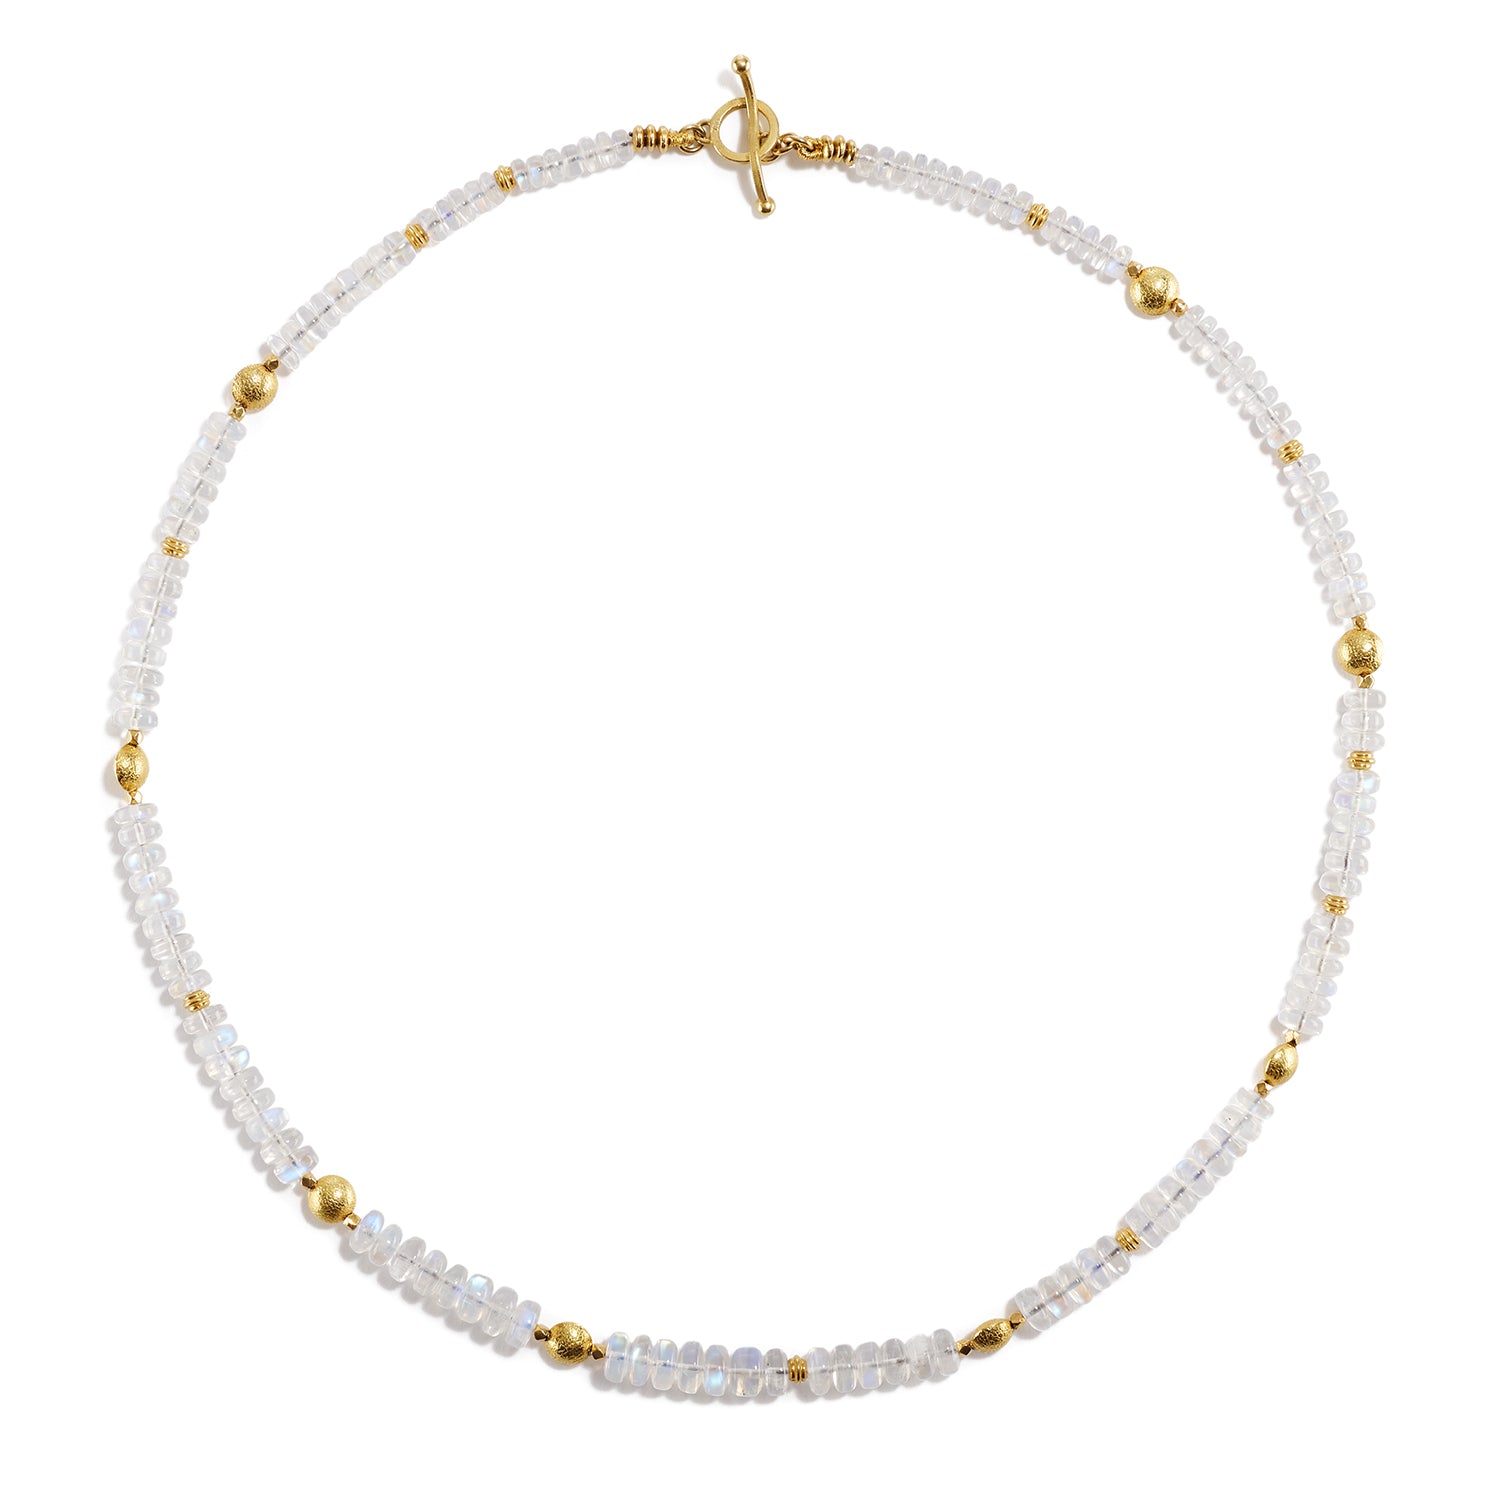 Moonstone and Rondelle Beaded Necklace